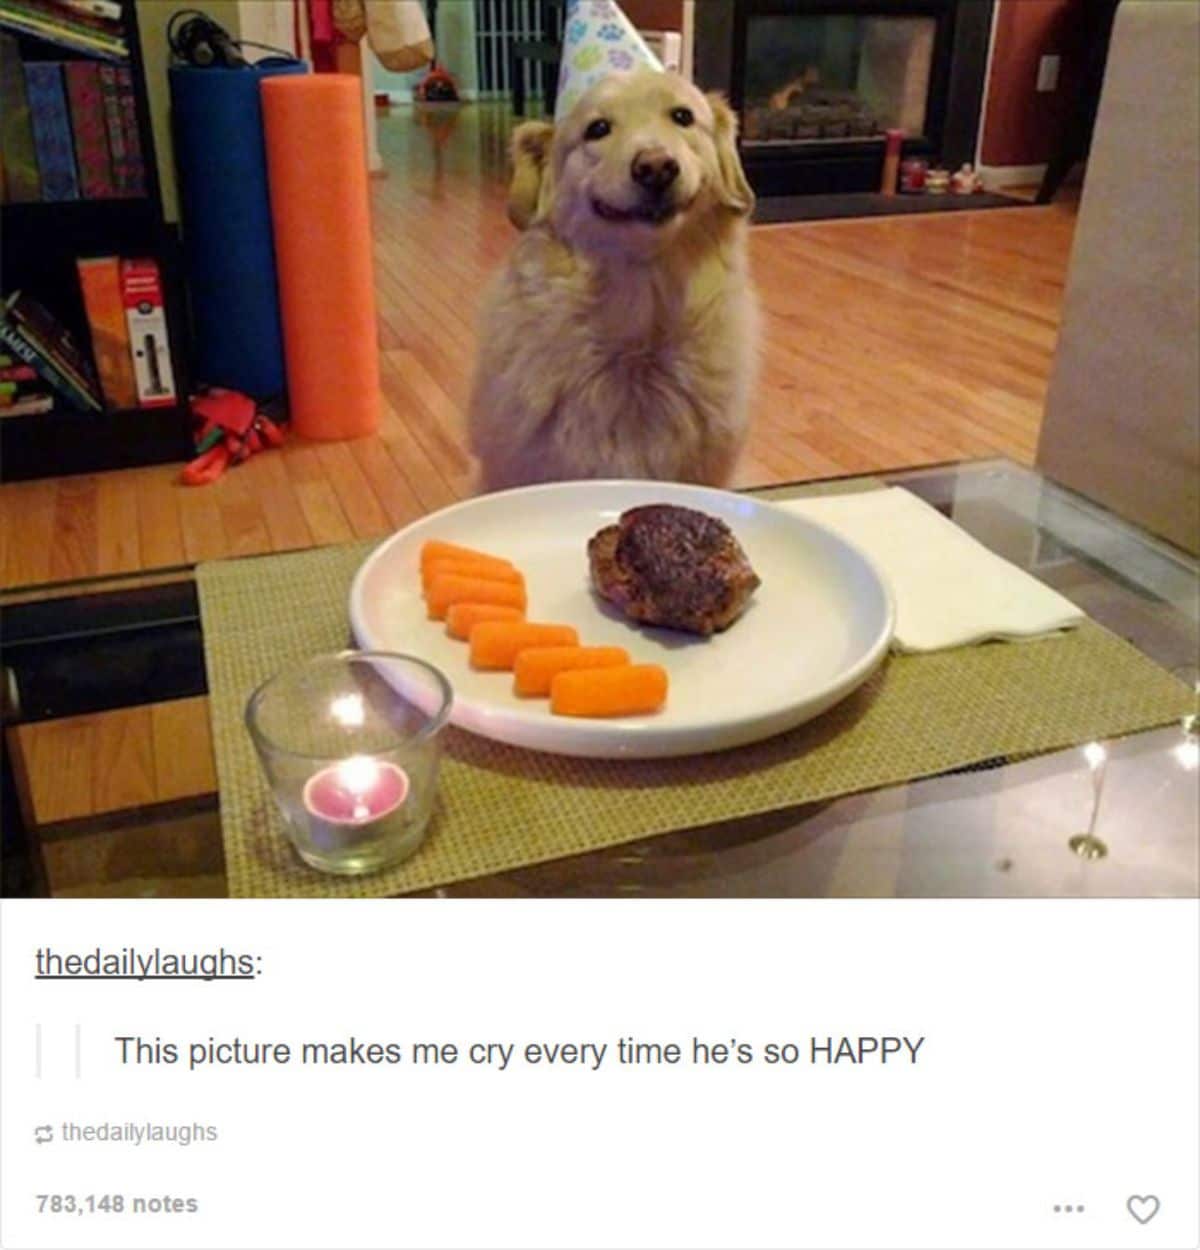 tumblr post of smiling golden retriever in a party hat sitting in front of a lit candle and a plate of carrort and meat with a caption saying the dog looks so happy